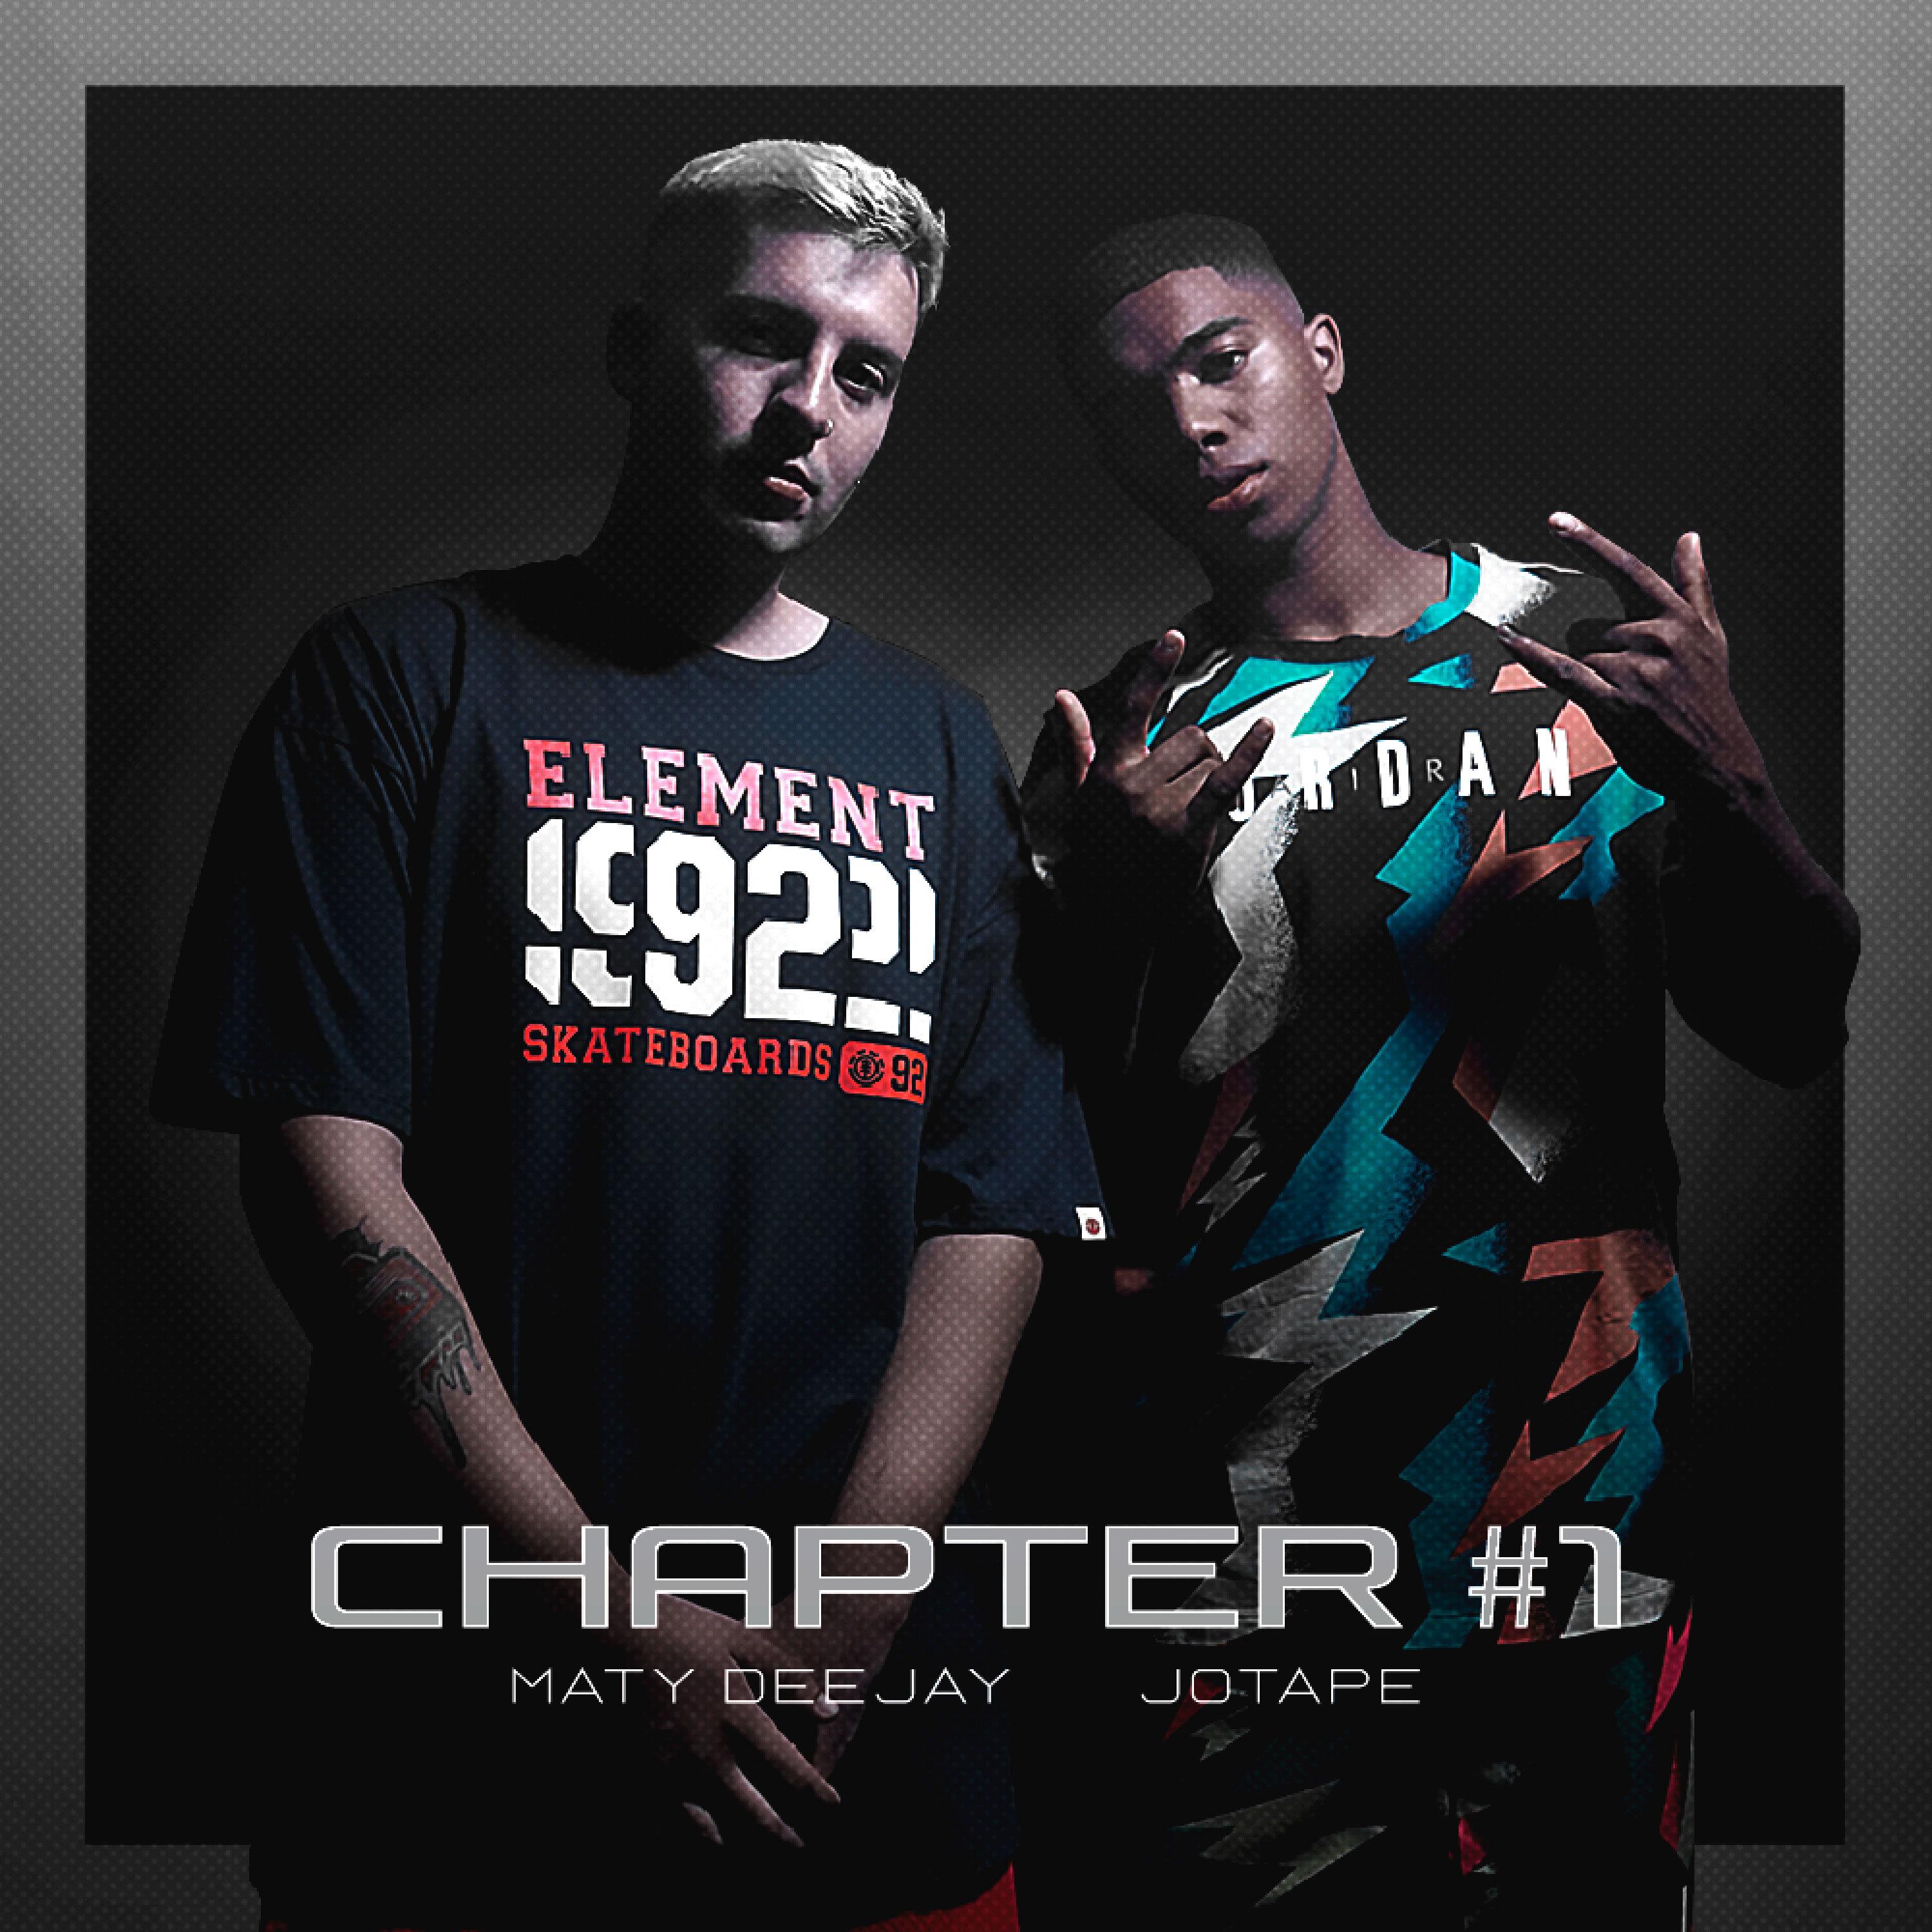 Maty Deejay - Chapter #1 | Lo Que Fuimos